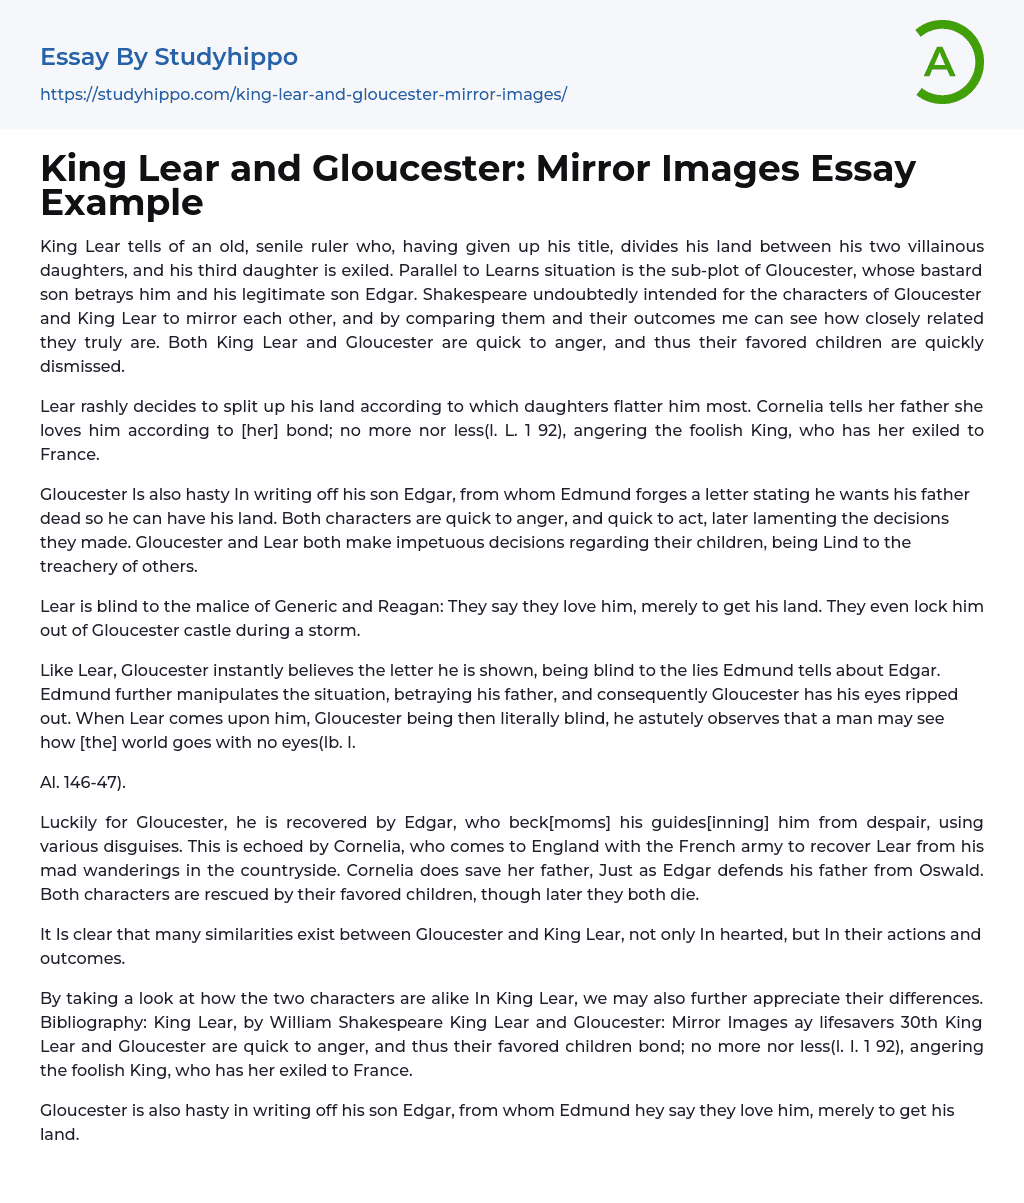 King Lear and Gloucester: Mirror Images Essay Example